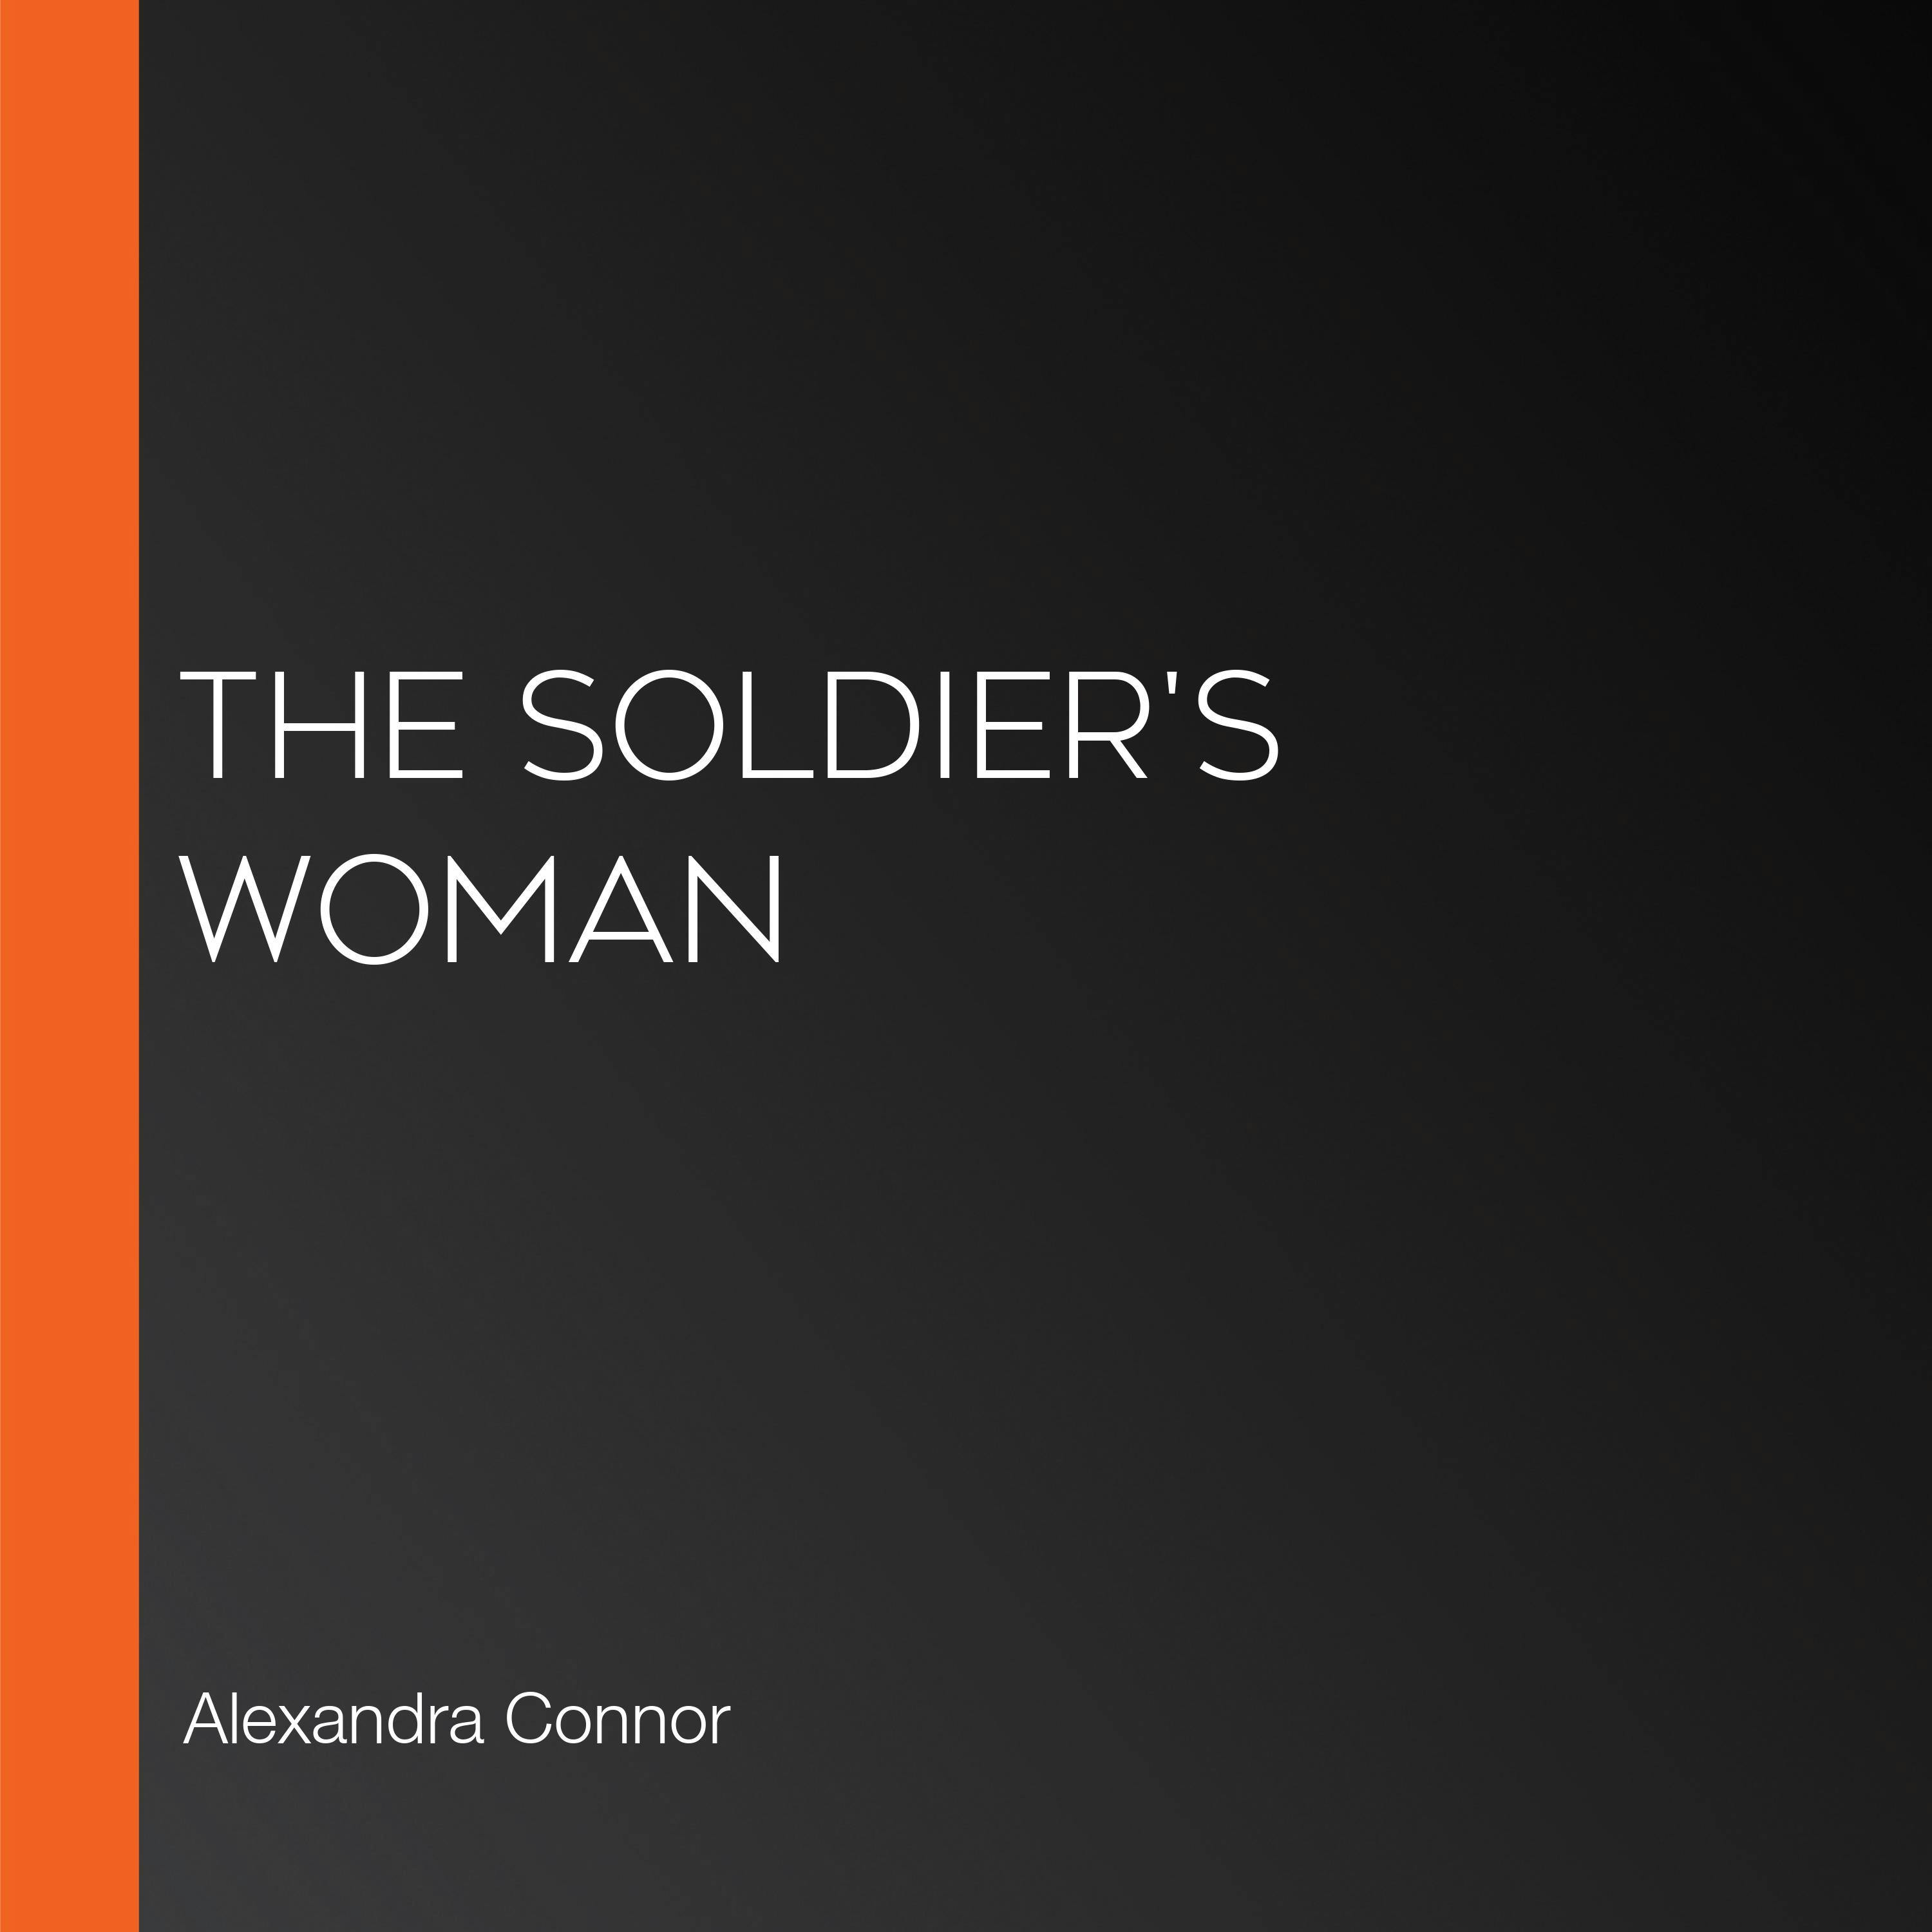 The Soldier's Woman - Alexandra Connor